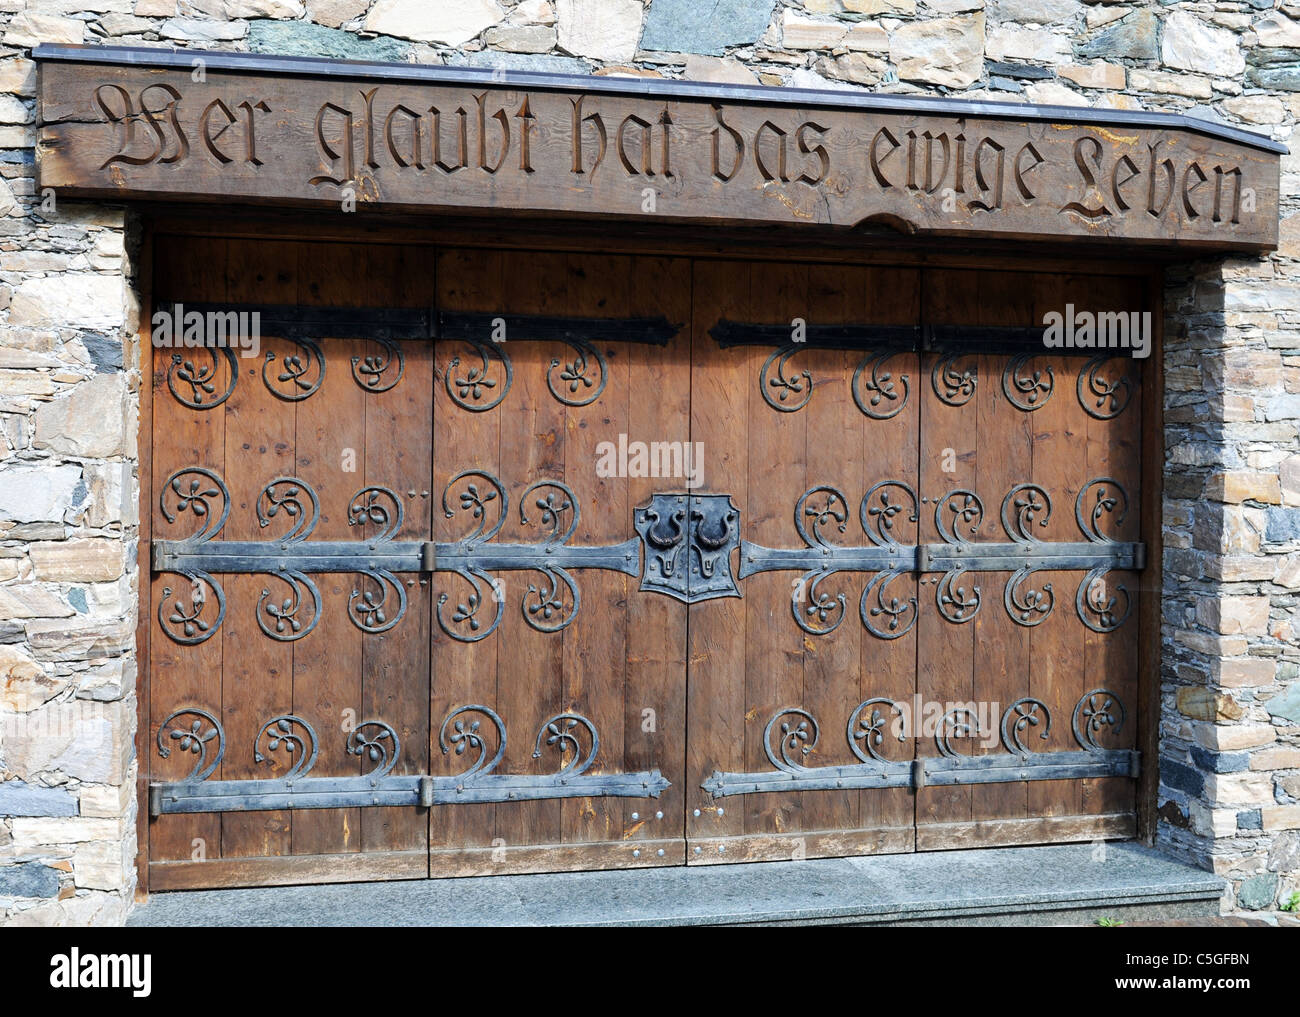 Entrance door to a christian building at Heiligenblut, Text means "Who confesses, will live forever" Stock Photo